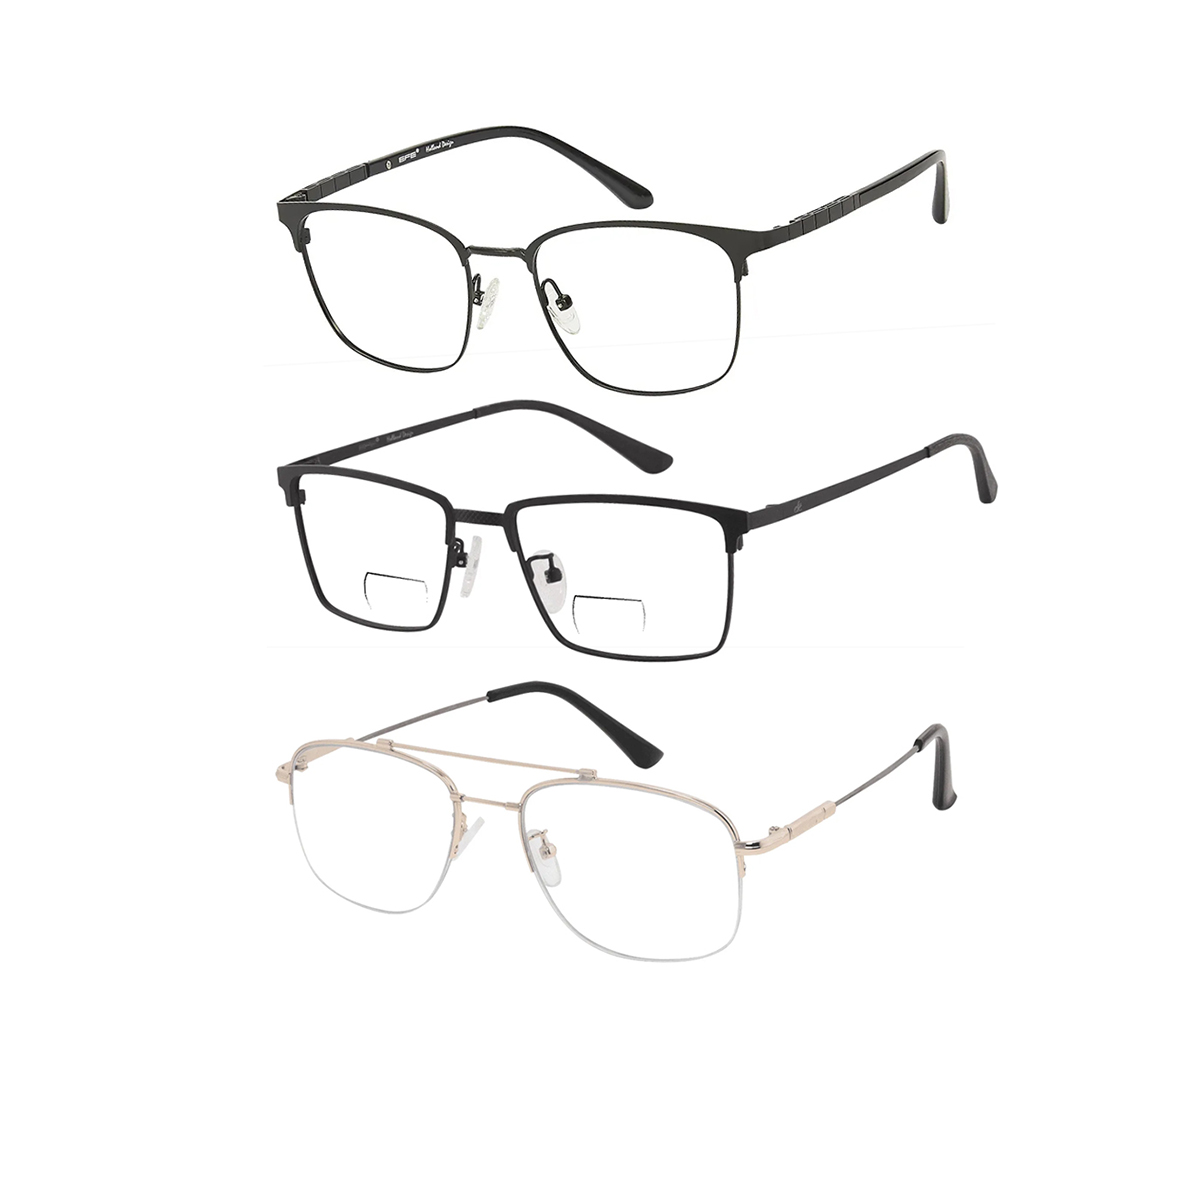 Reading Glasses Collection Terace $24.99/Set